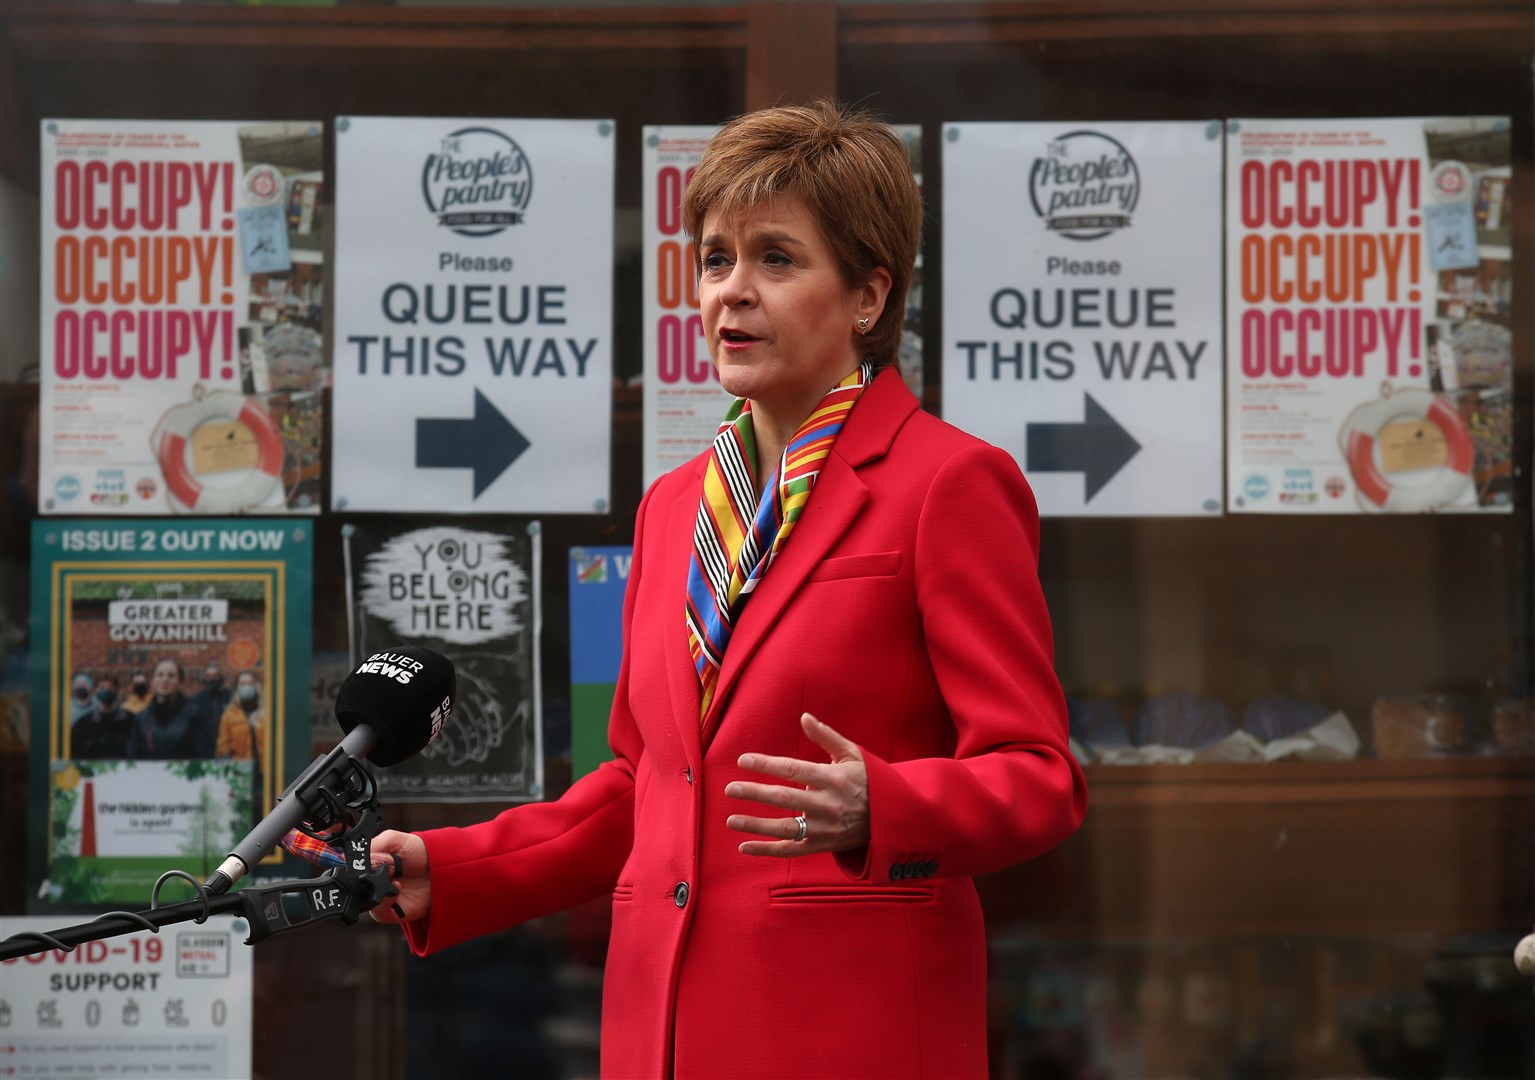 Nicola Sturgeon said she had ‘no doubt’ that Russia was behind the attack three years ago (Andrew Milligan/PA)